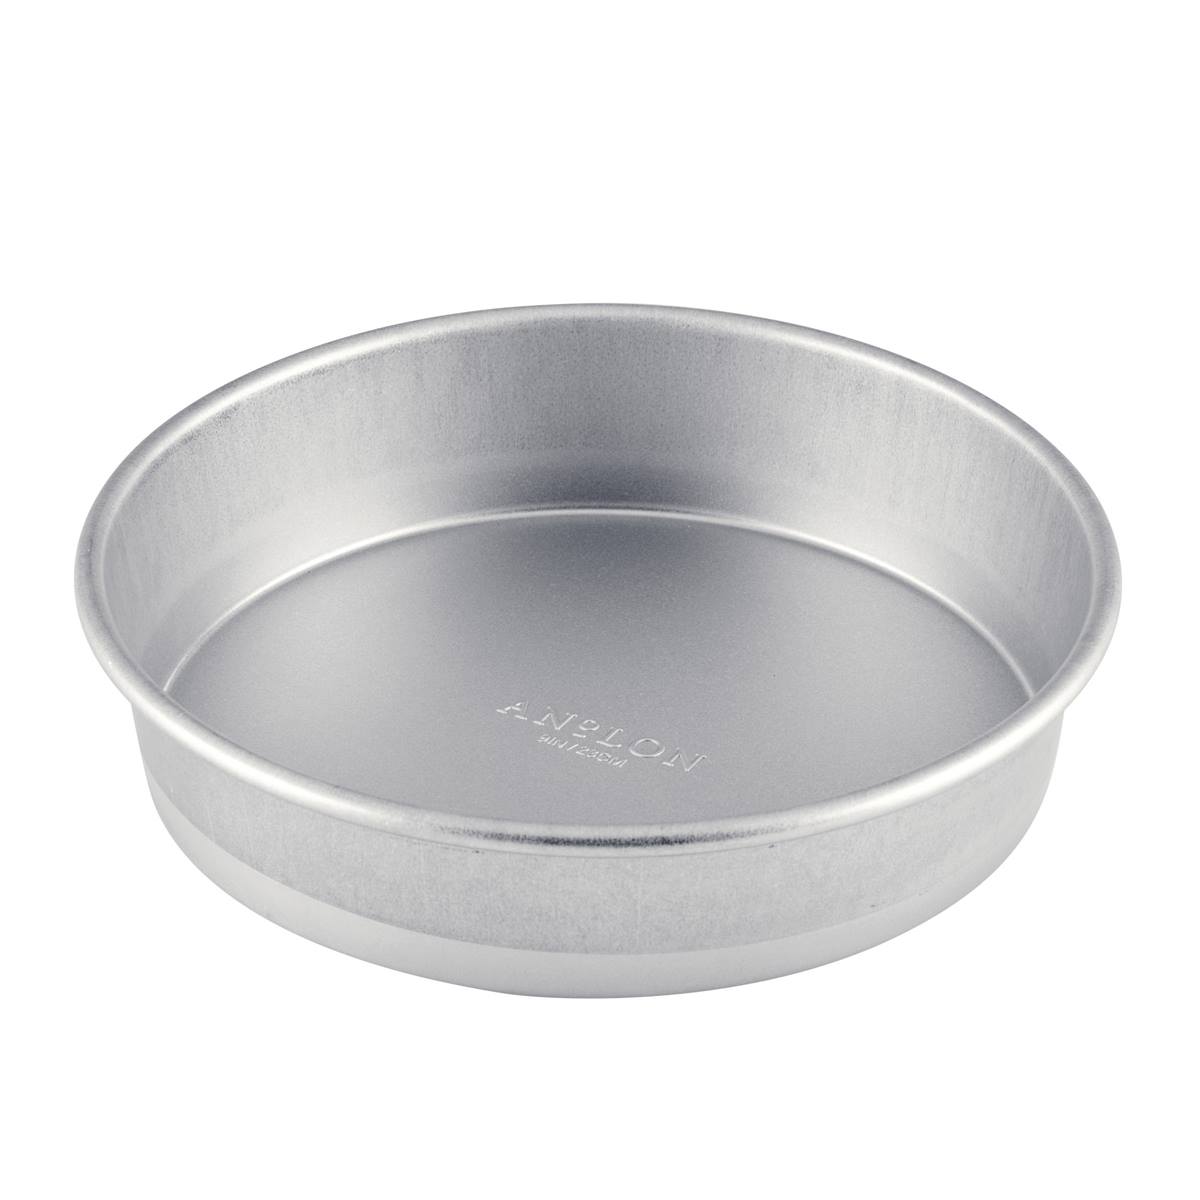 Anolon(R) Professional Bakeware 9in. Round Cake Pan